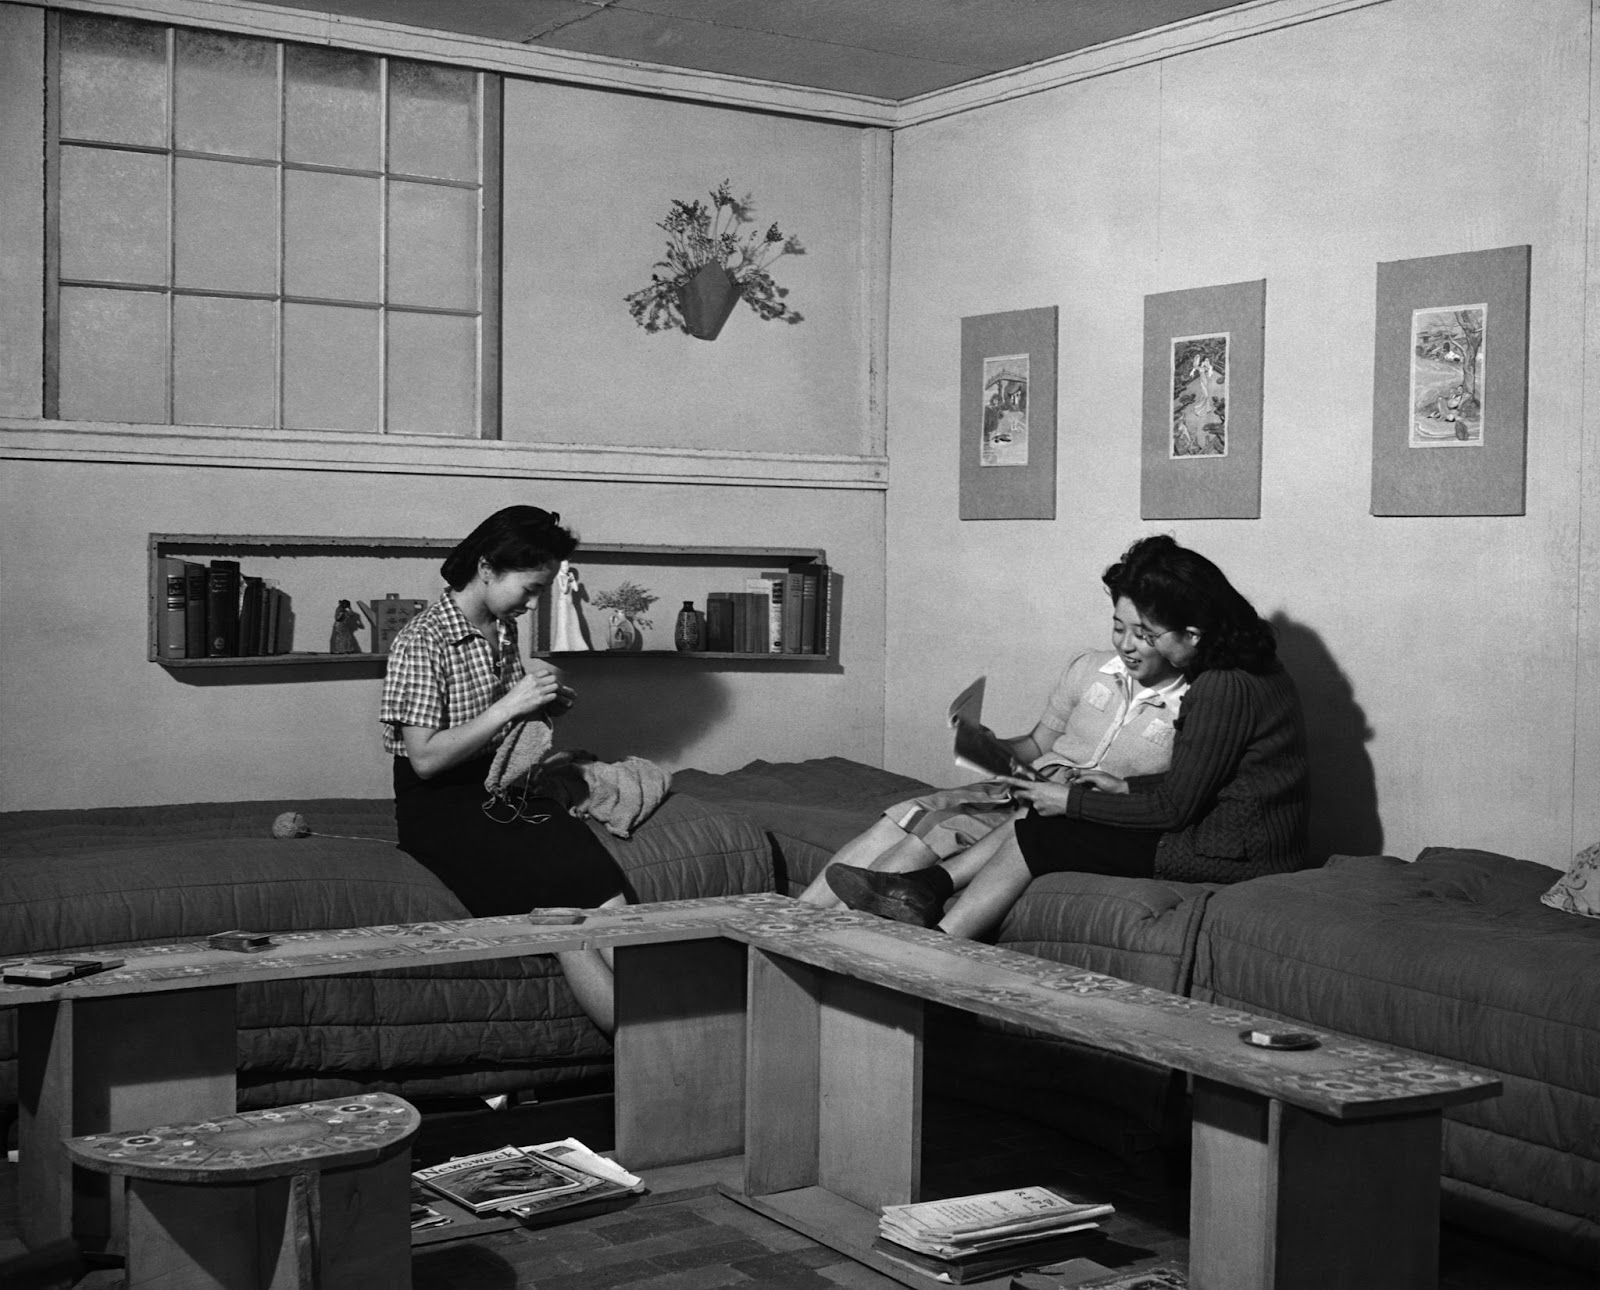 Three women city on beds in a small room. Two are reading a magazine while a third is sewing. Behind them, Japanese artwork hangs on a wall.